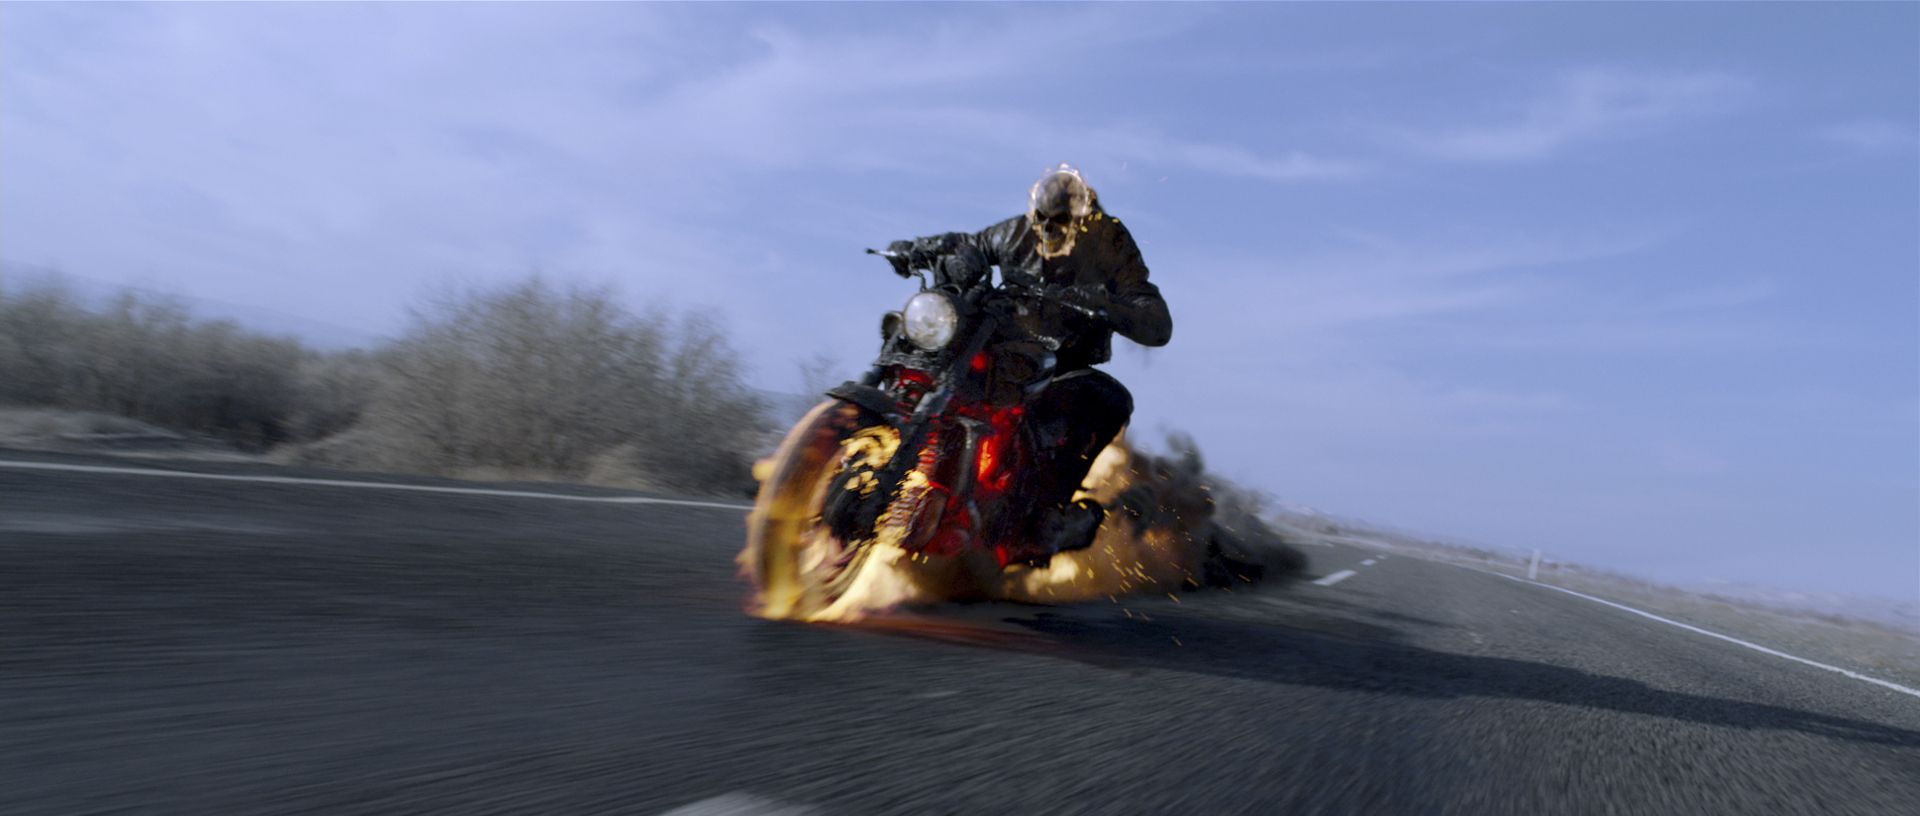 29 Ghost Rider Spirit Of Vengeance HD Wallpapers Backgrounds